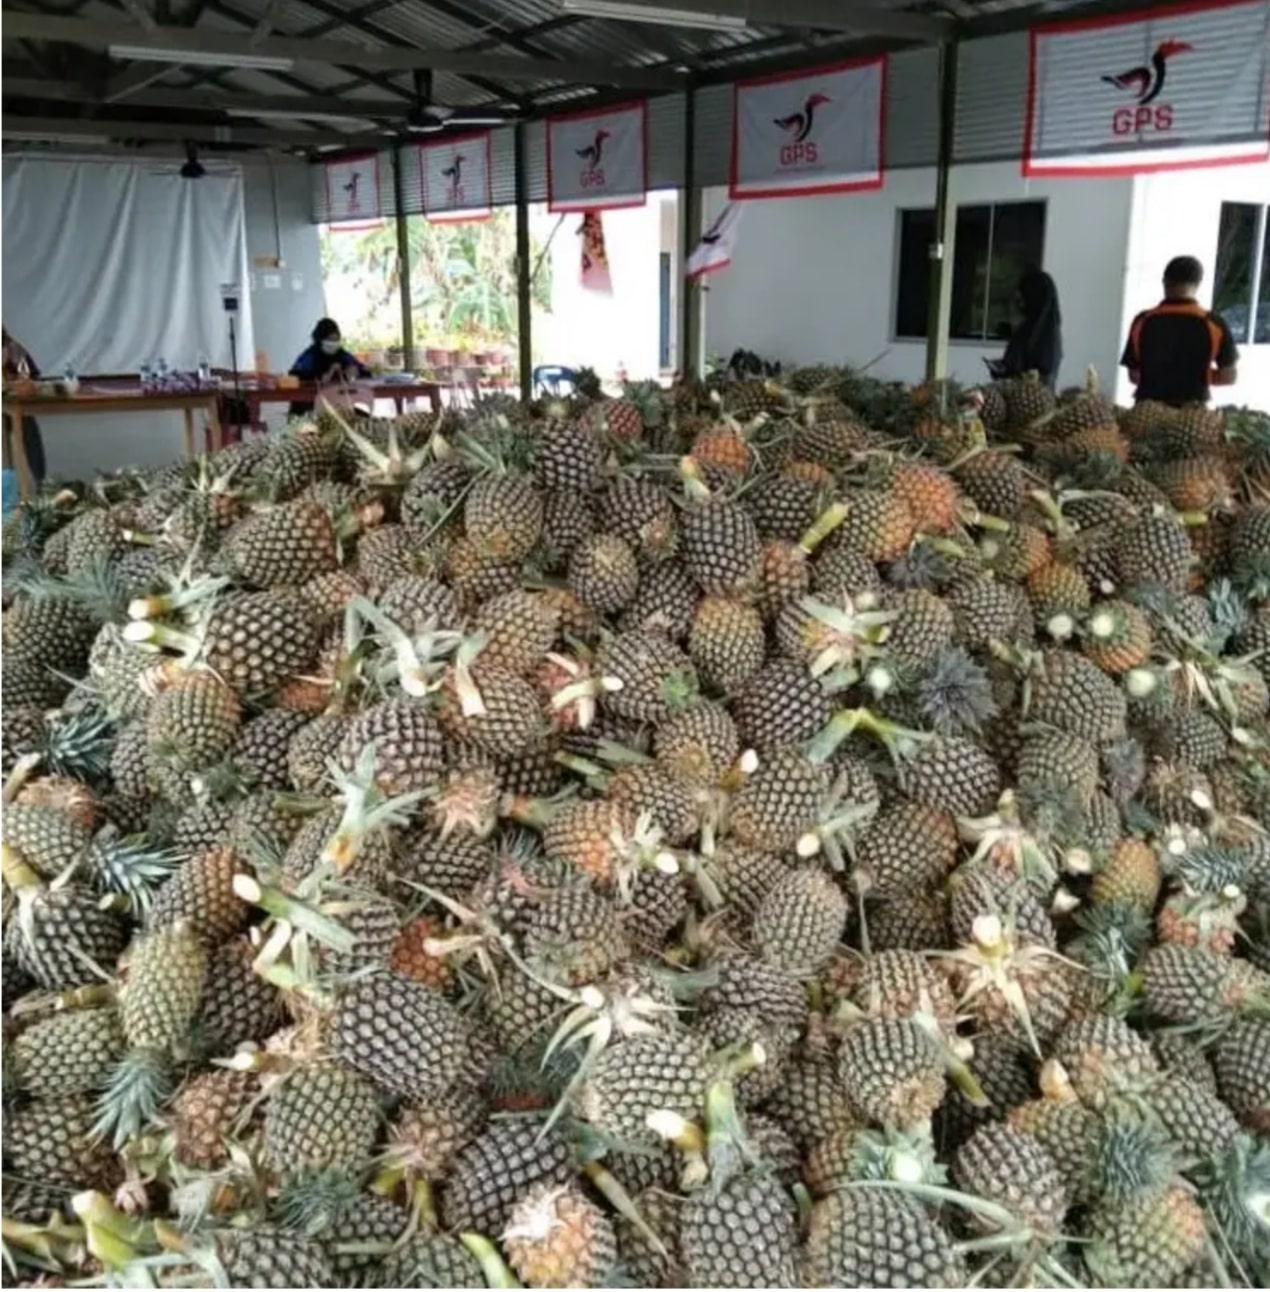 Dalat/Oya Farmers’ Body rescues 11,000 kgs of unsold pineapples, distributes them to local communities